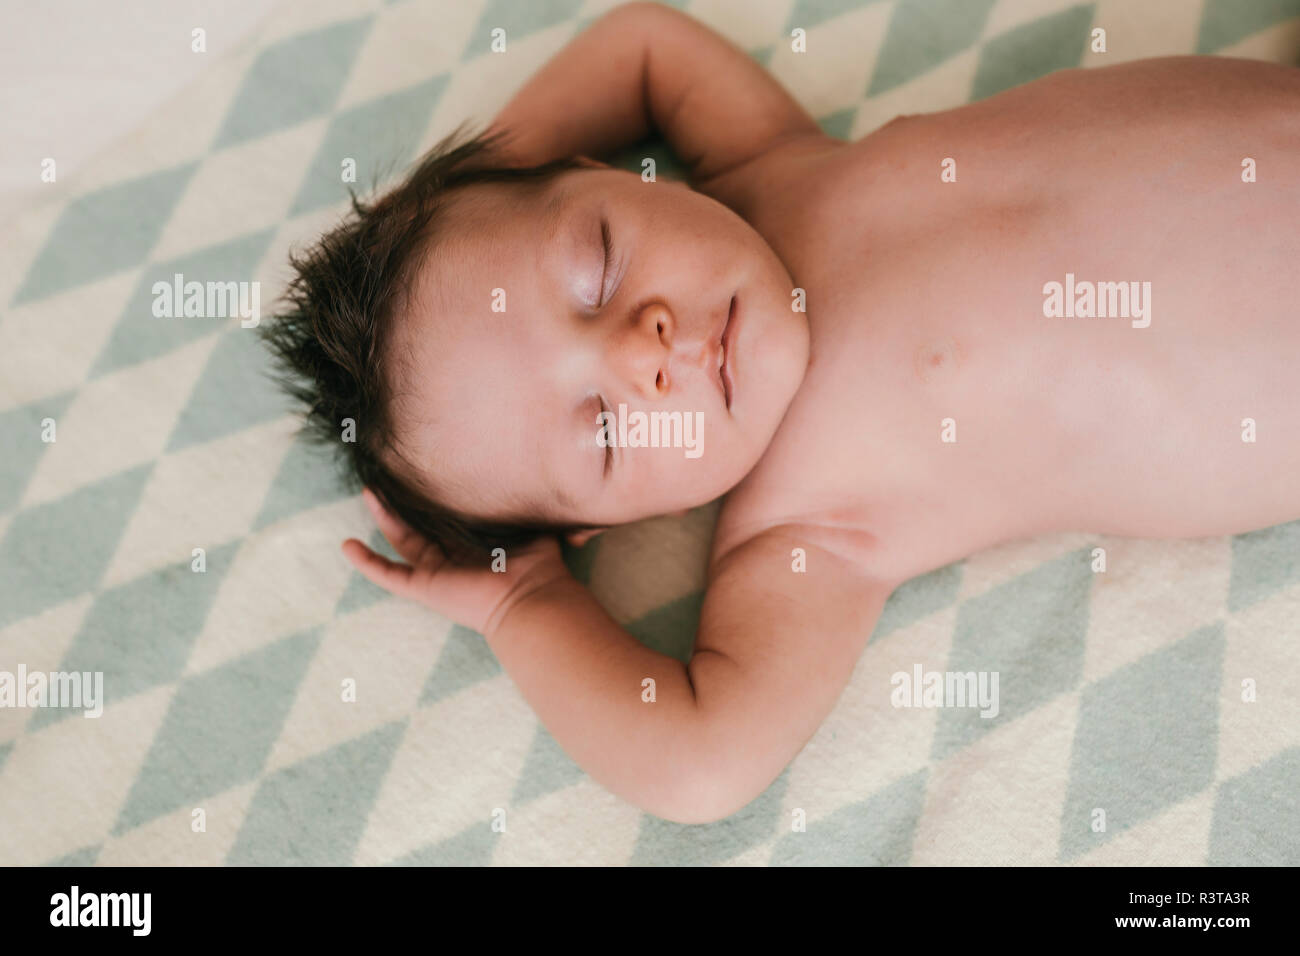 Portrait of a newborn baby boy lying on a blanket with closed eyes Stock Photo